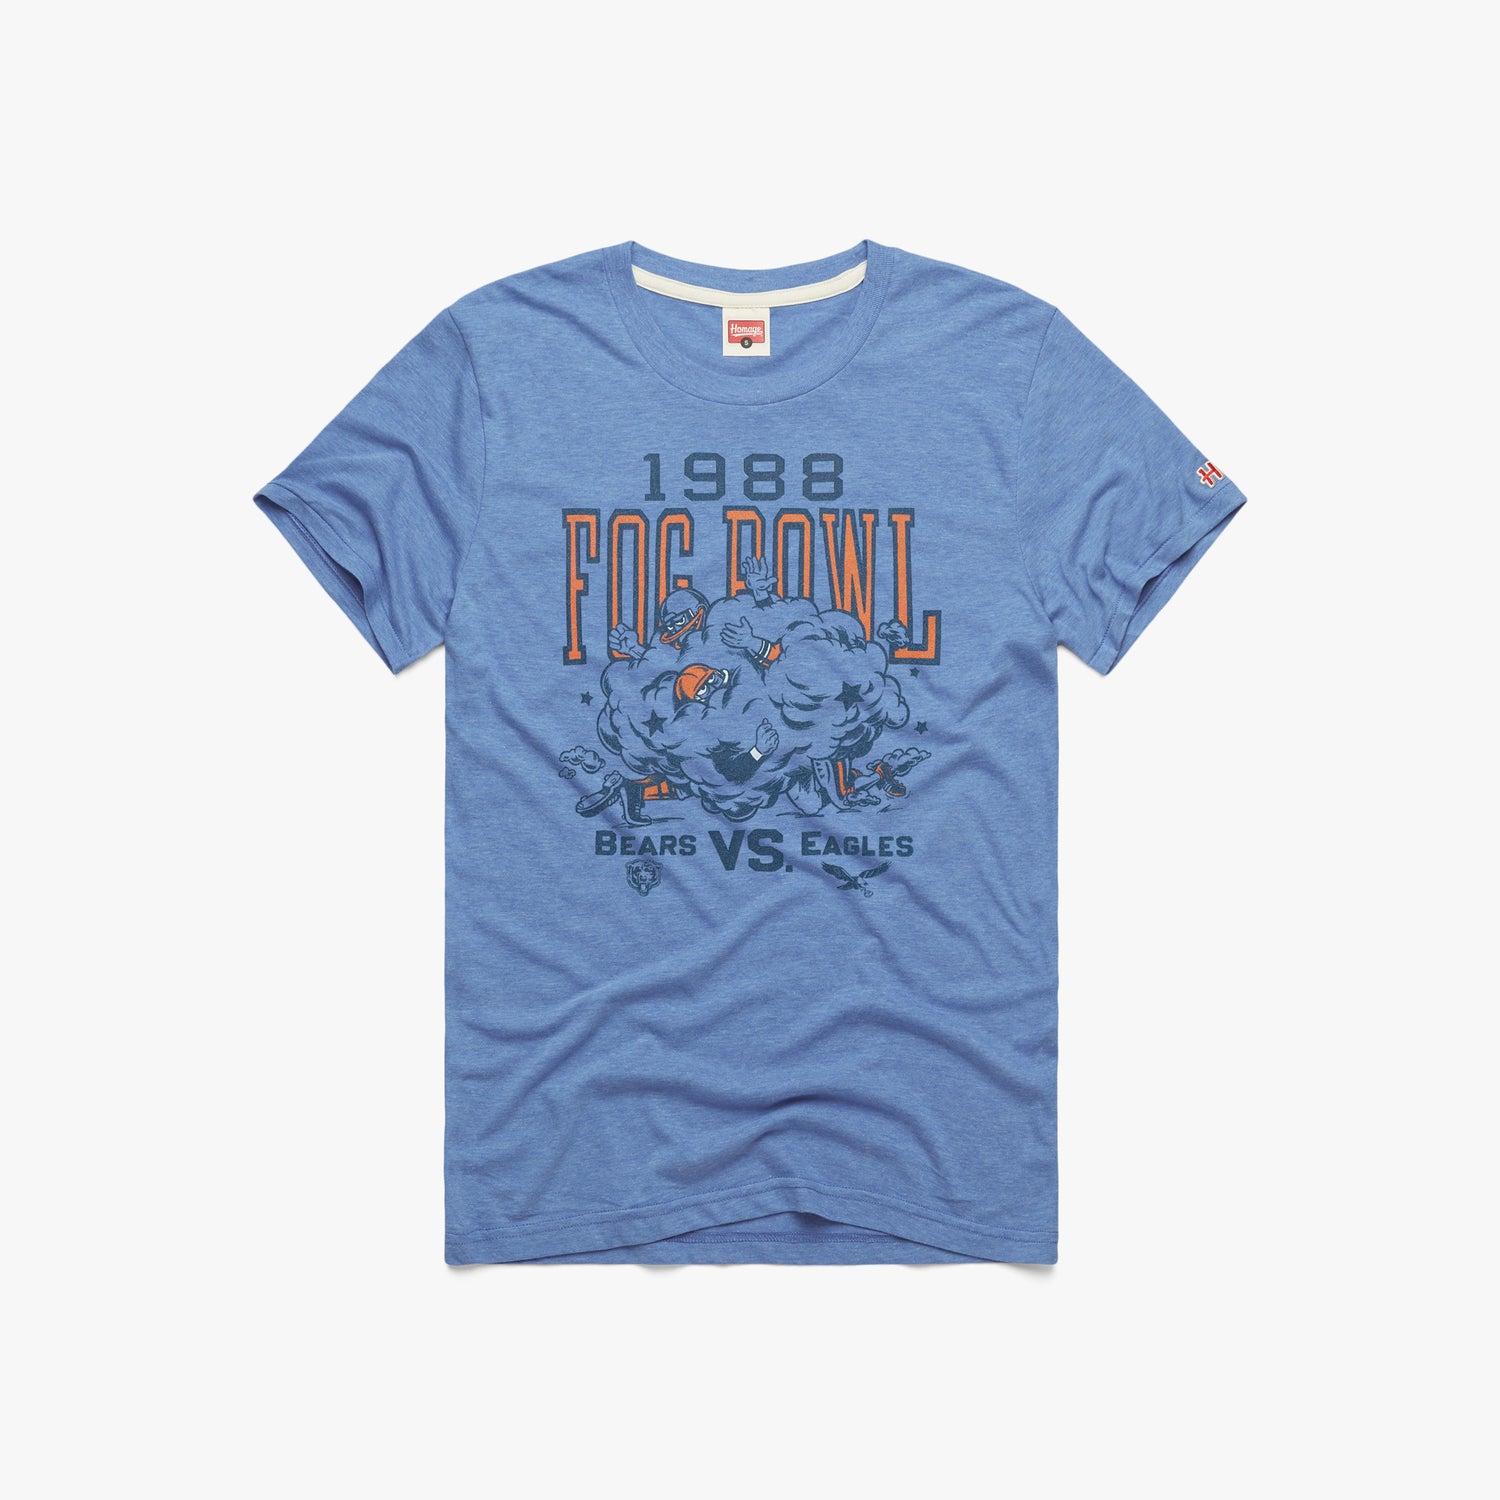 Chicago Bears 1988 Fog Bowl T-Shirt from Homage. | Officially Licensed Vintage NFL Apparel from Homage Pro Shop.